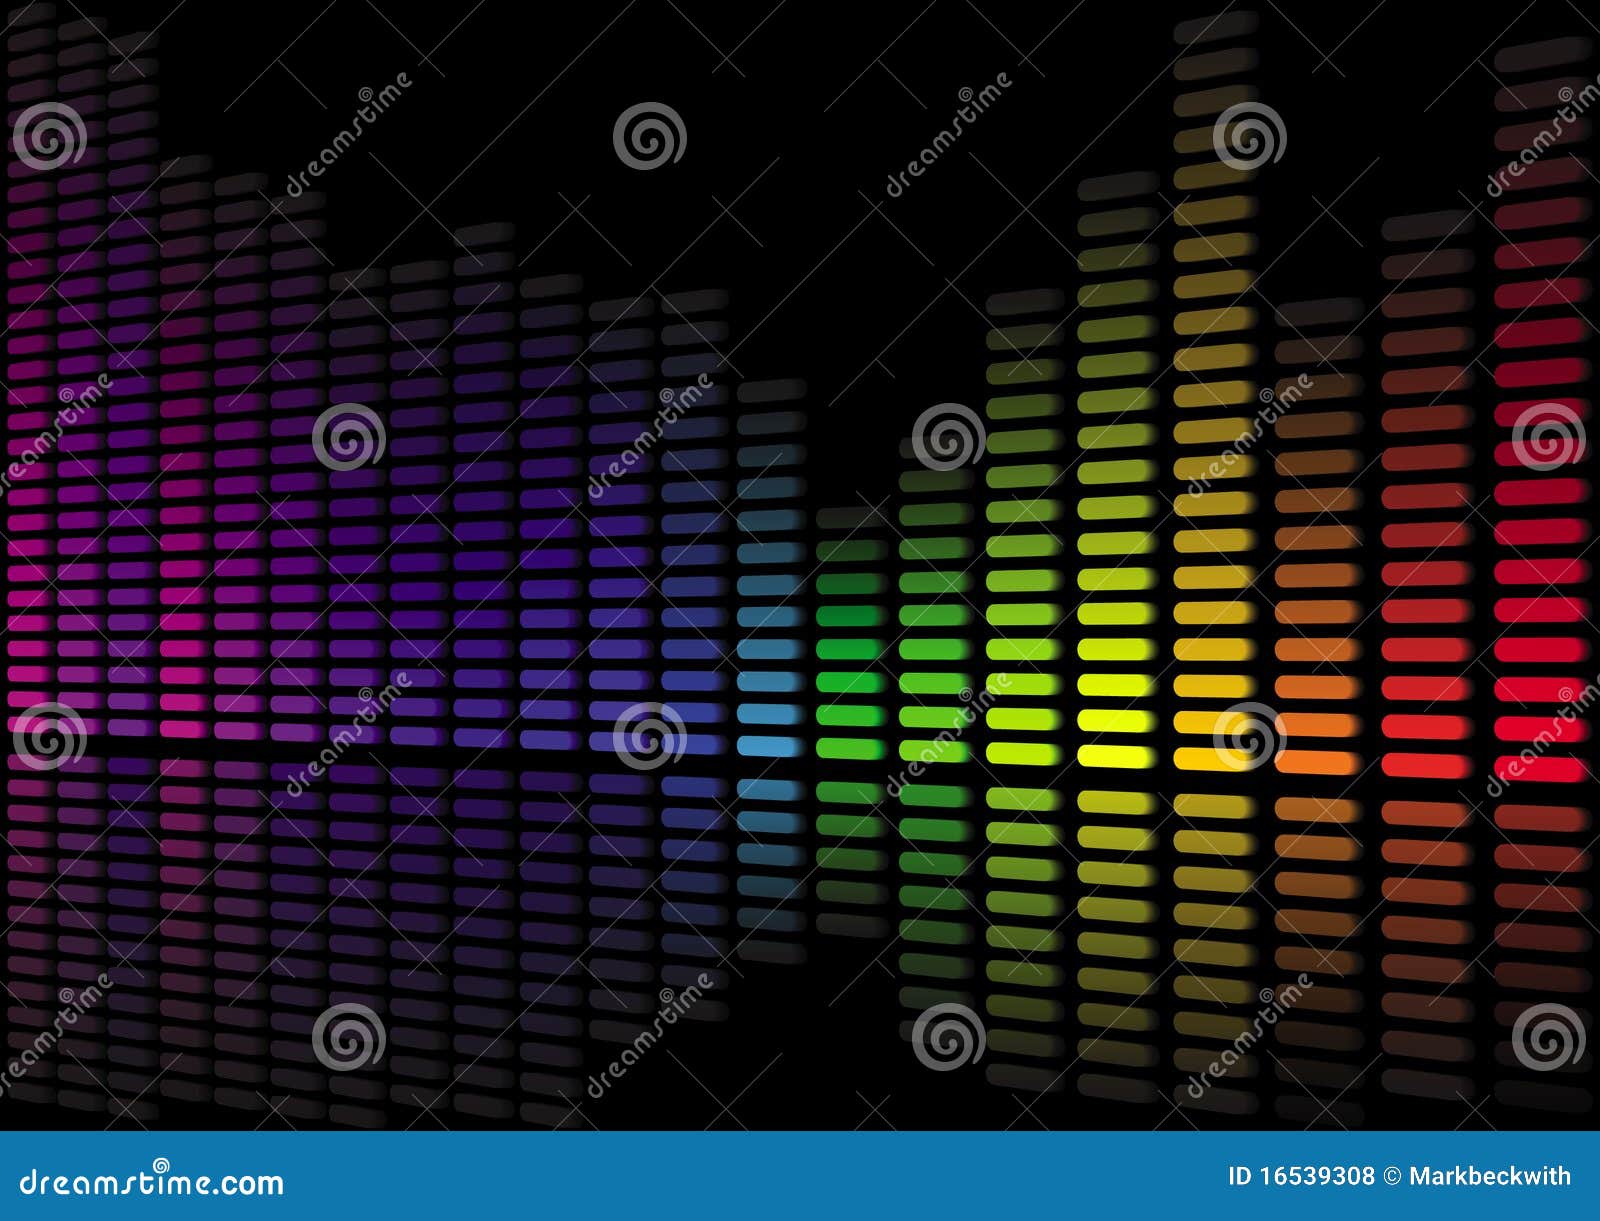 Sound level abstract 3D stock vector. Illustration of meter - 16539308